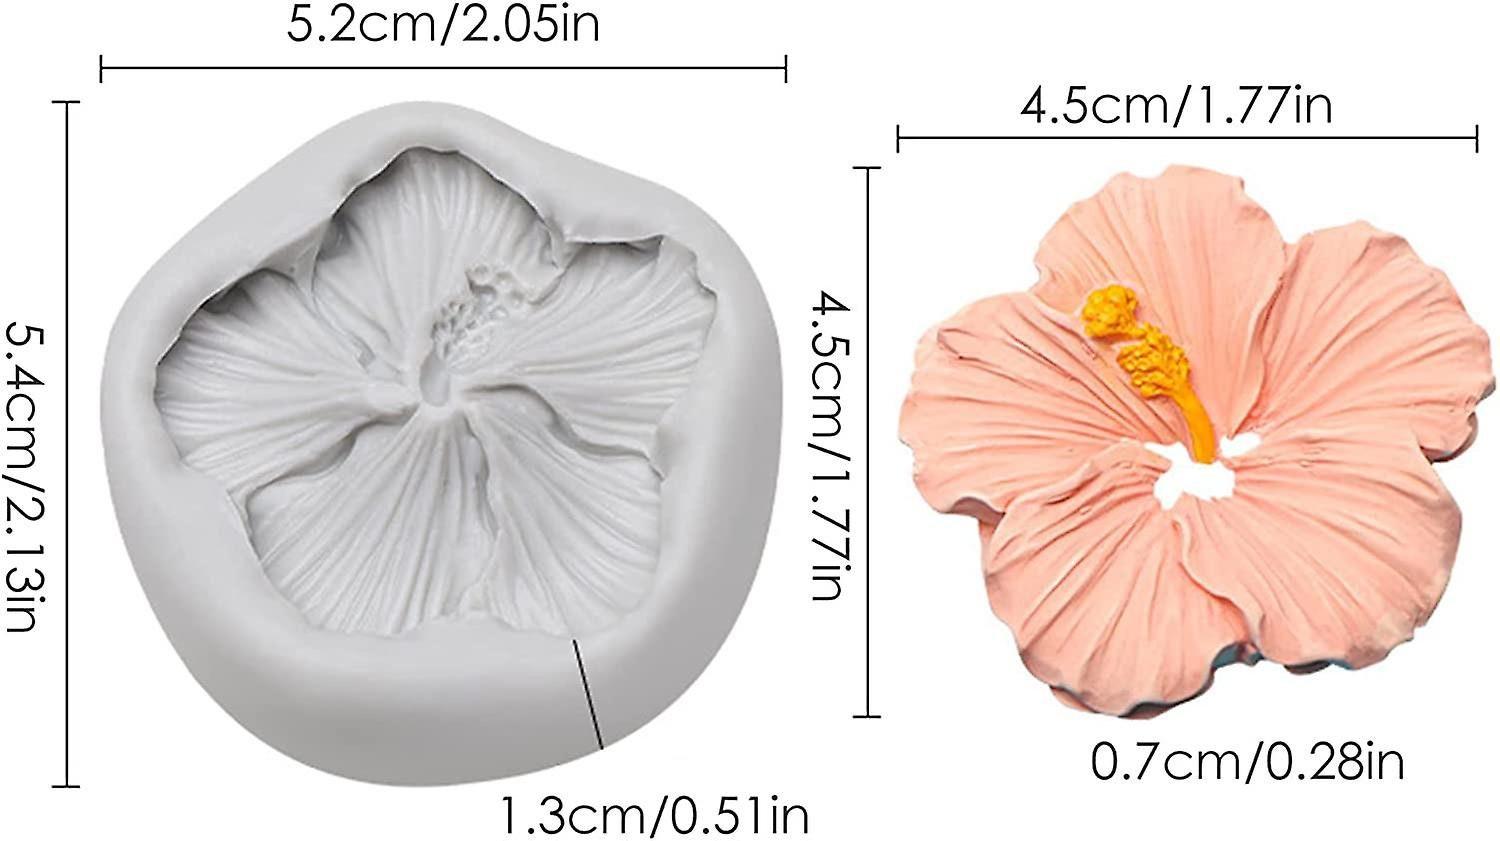 Small Floral Mold - Tropical Hibiscus Flower - for Resin, Clay, Casting and Baking, or for Soap or wax embeds